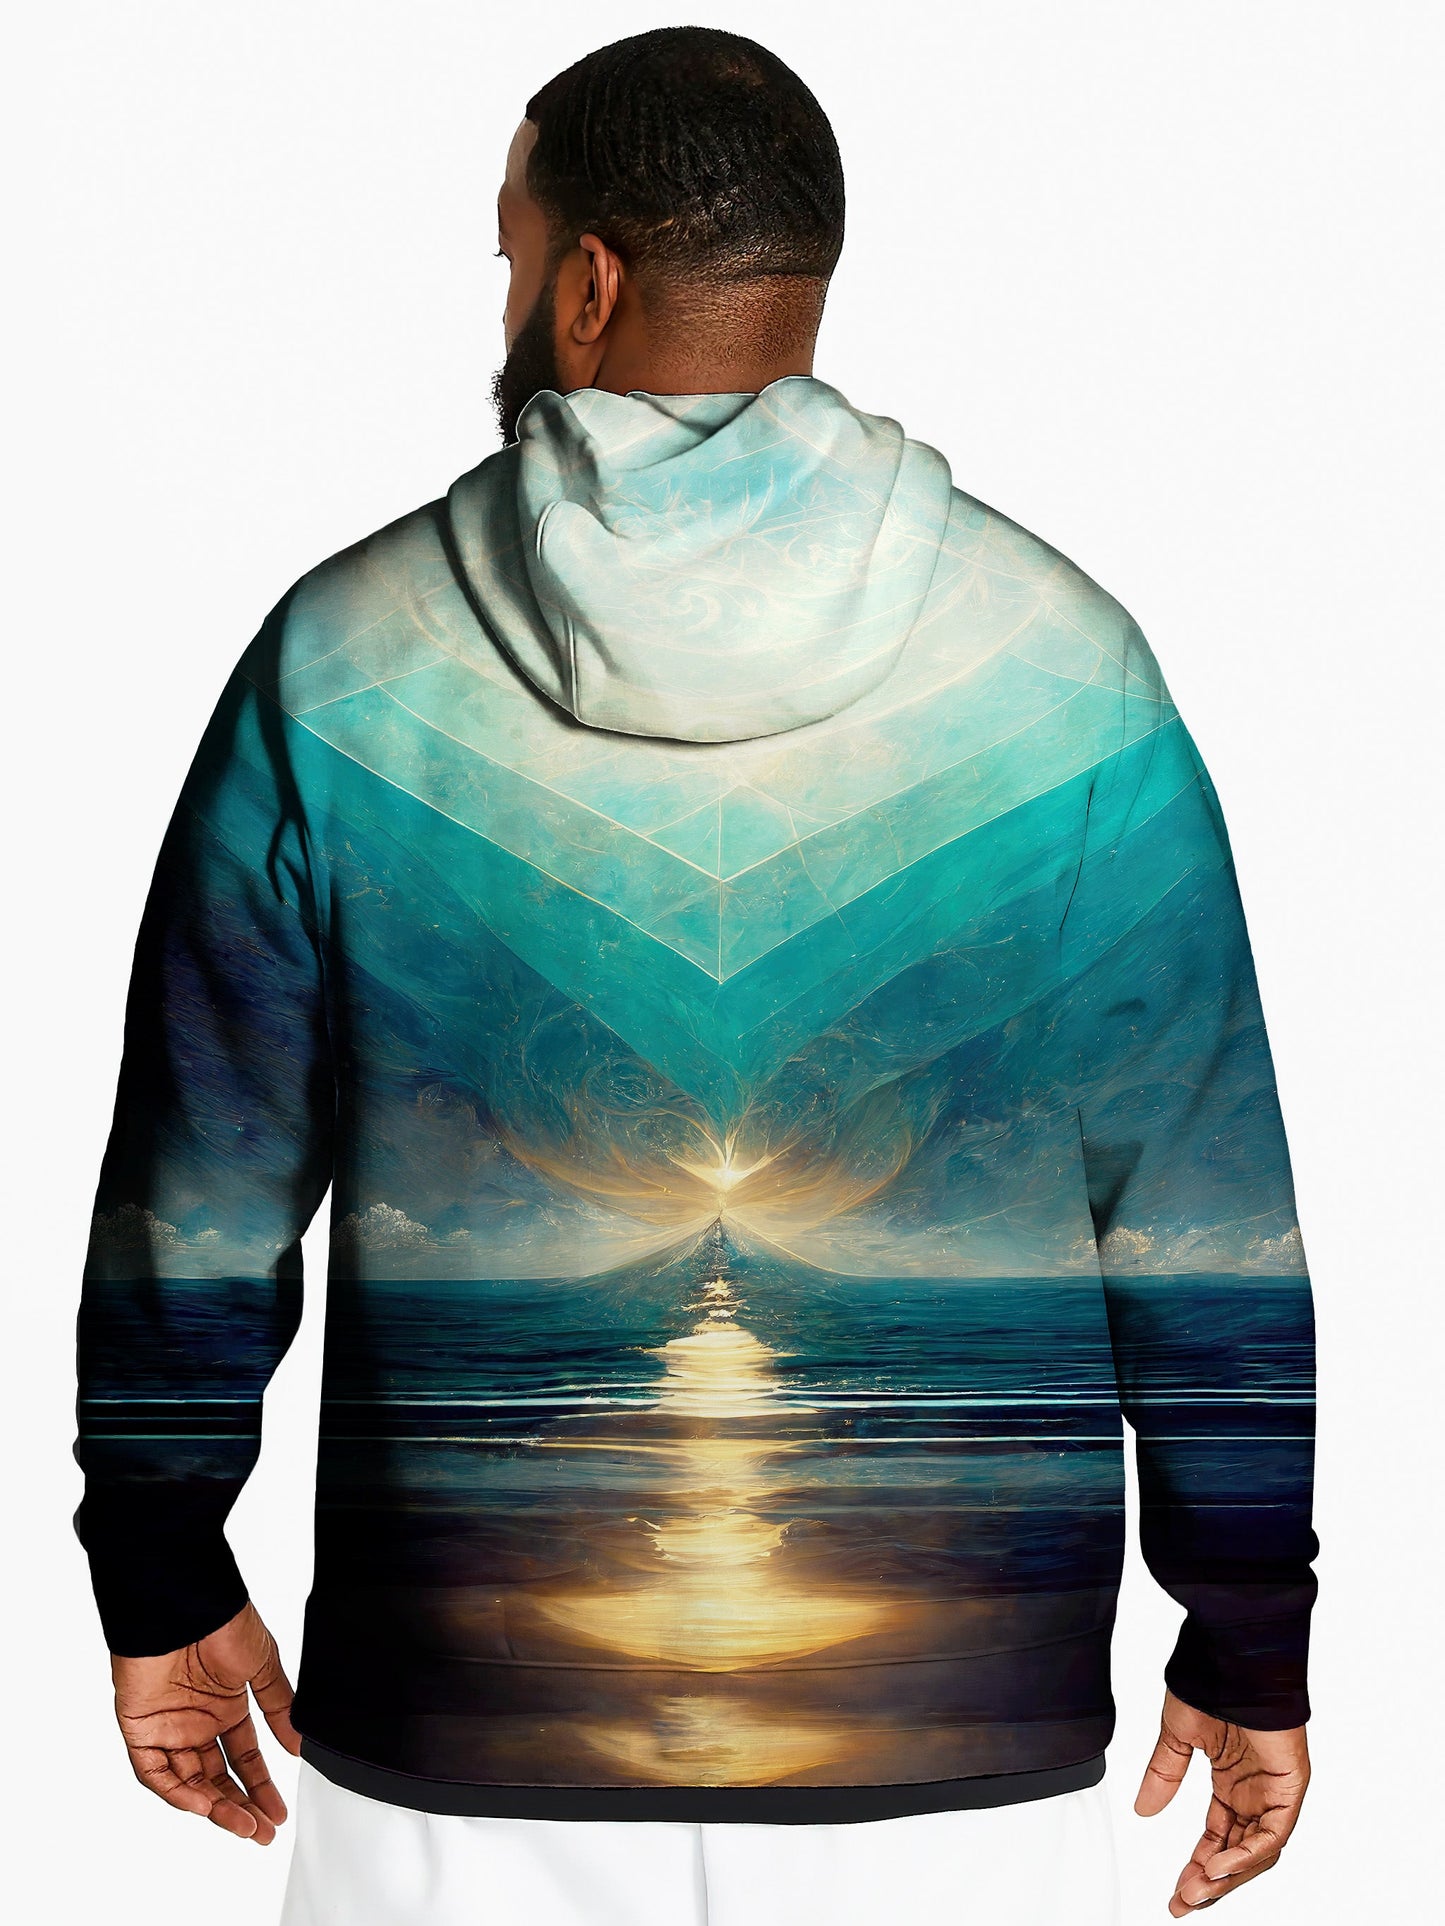 Bewildered Discovery Unisex Pullover Hoodie - EDM Festival Clothing - Boogie Threads